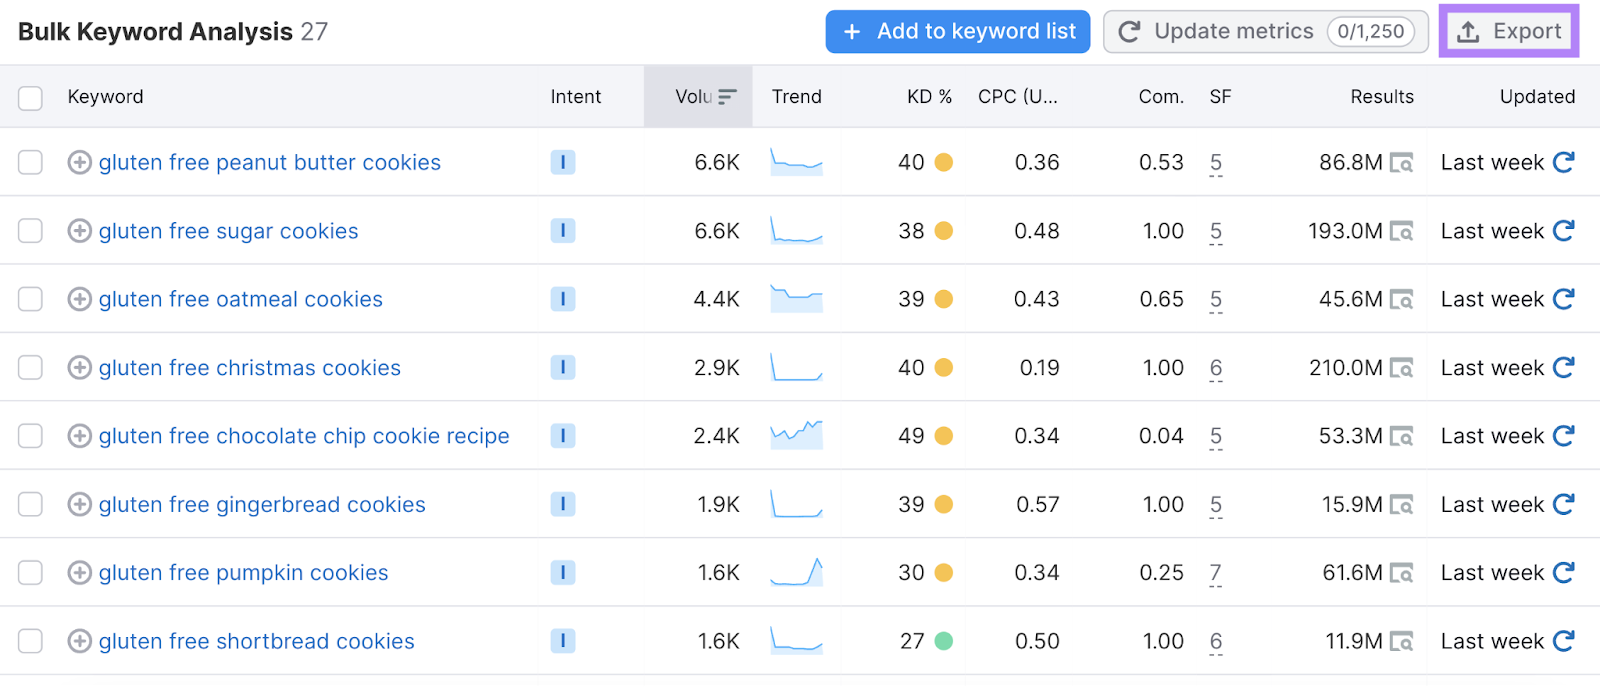 "Export" button highlighted in the "Bulk Keyword Analysis" table